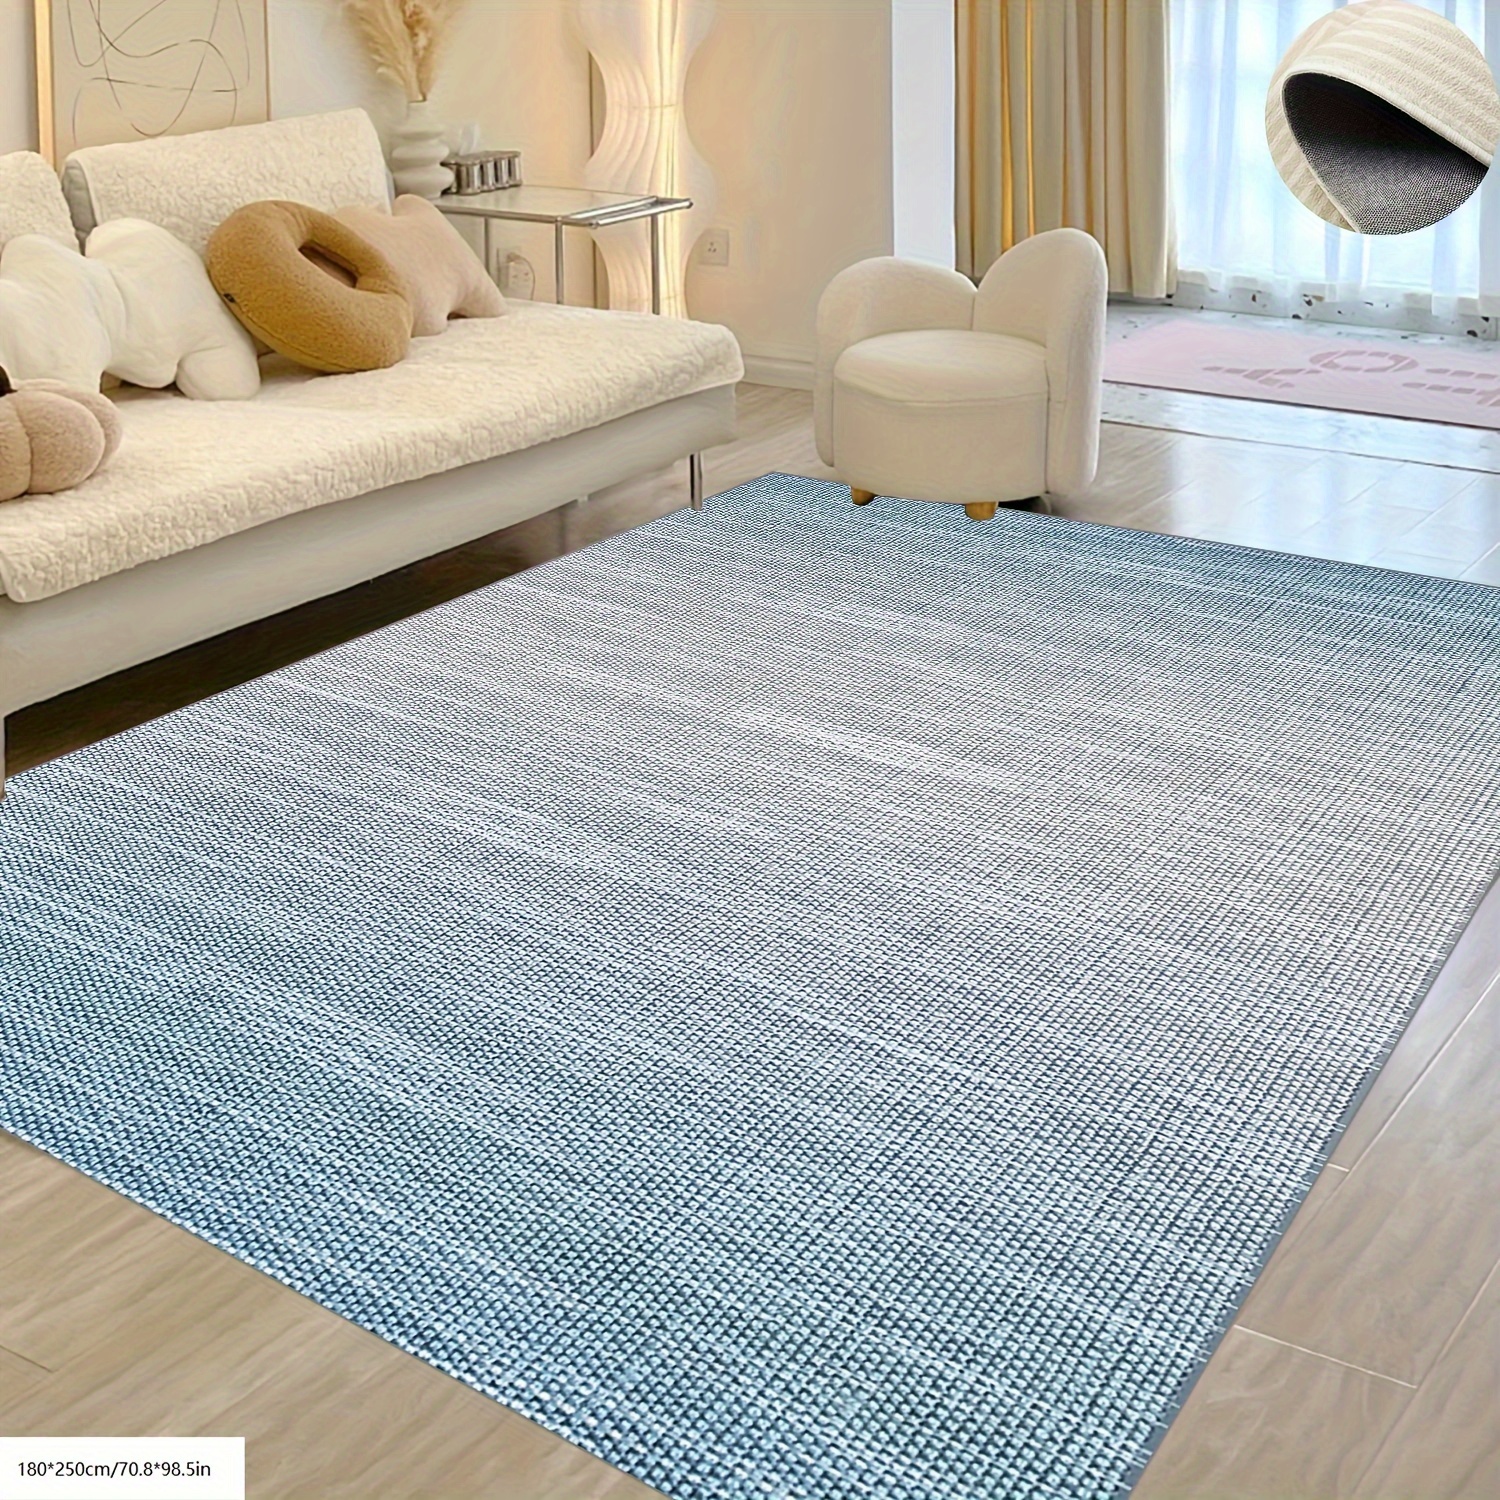 

1pc, Modern Simple Abstract Texture Line Blue Floor Mat Carpet, Easy To Clean Soft Machine Washable, Non-slip, Stain Resistant, Suitable For Any Space Area Including Office, Sofa, Bedside, Kitchen